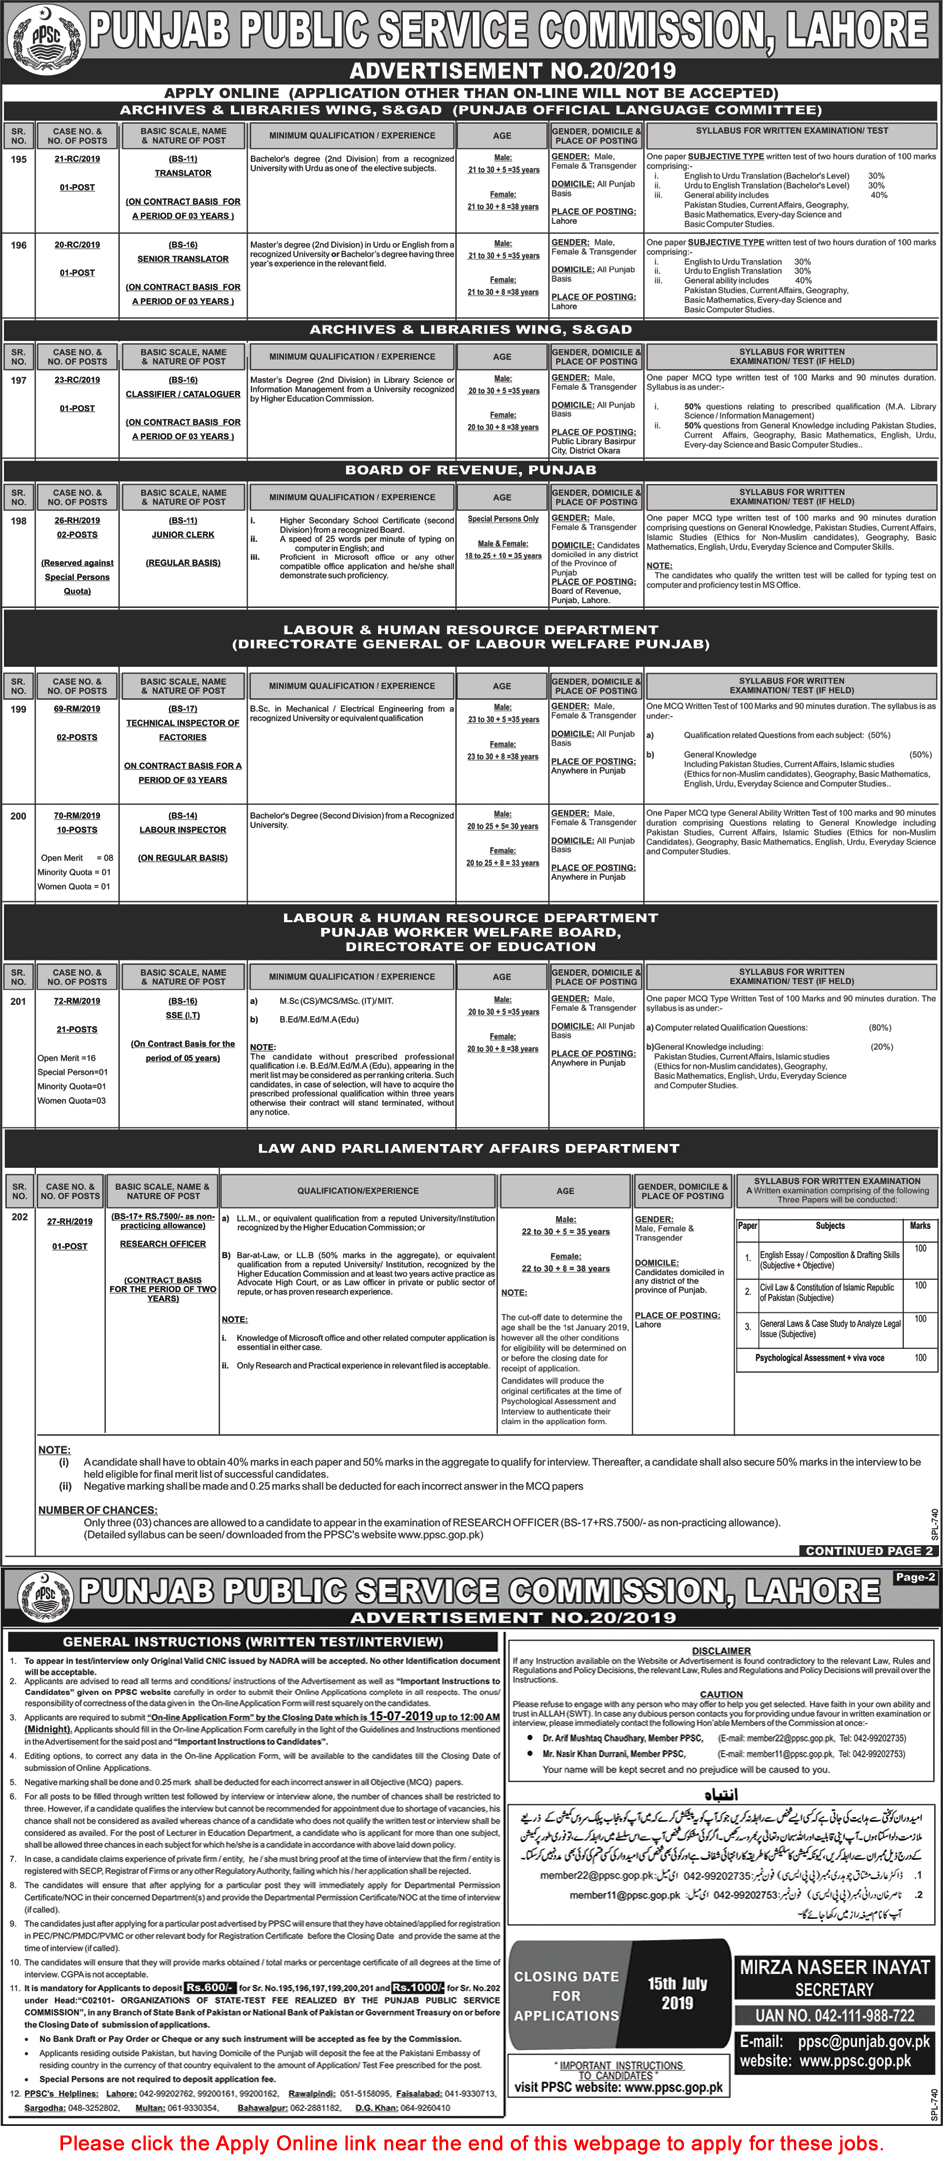 PPSC Jobs June 2019 July Apply Online Consolidated Advertisement No 20/2019 Latest